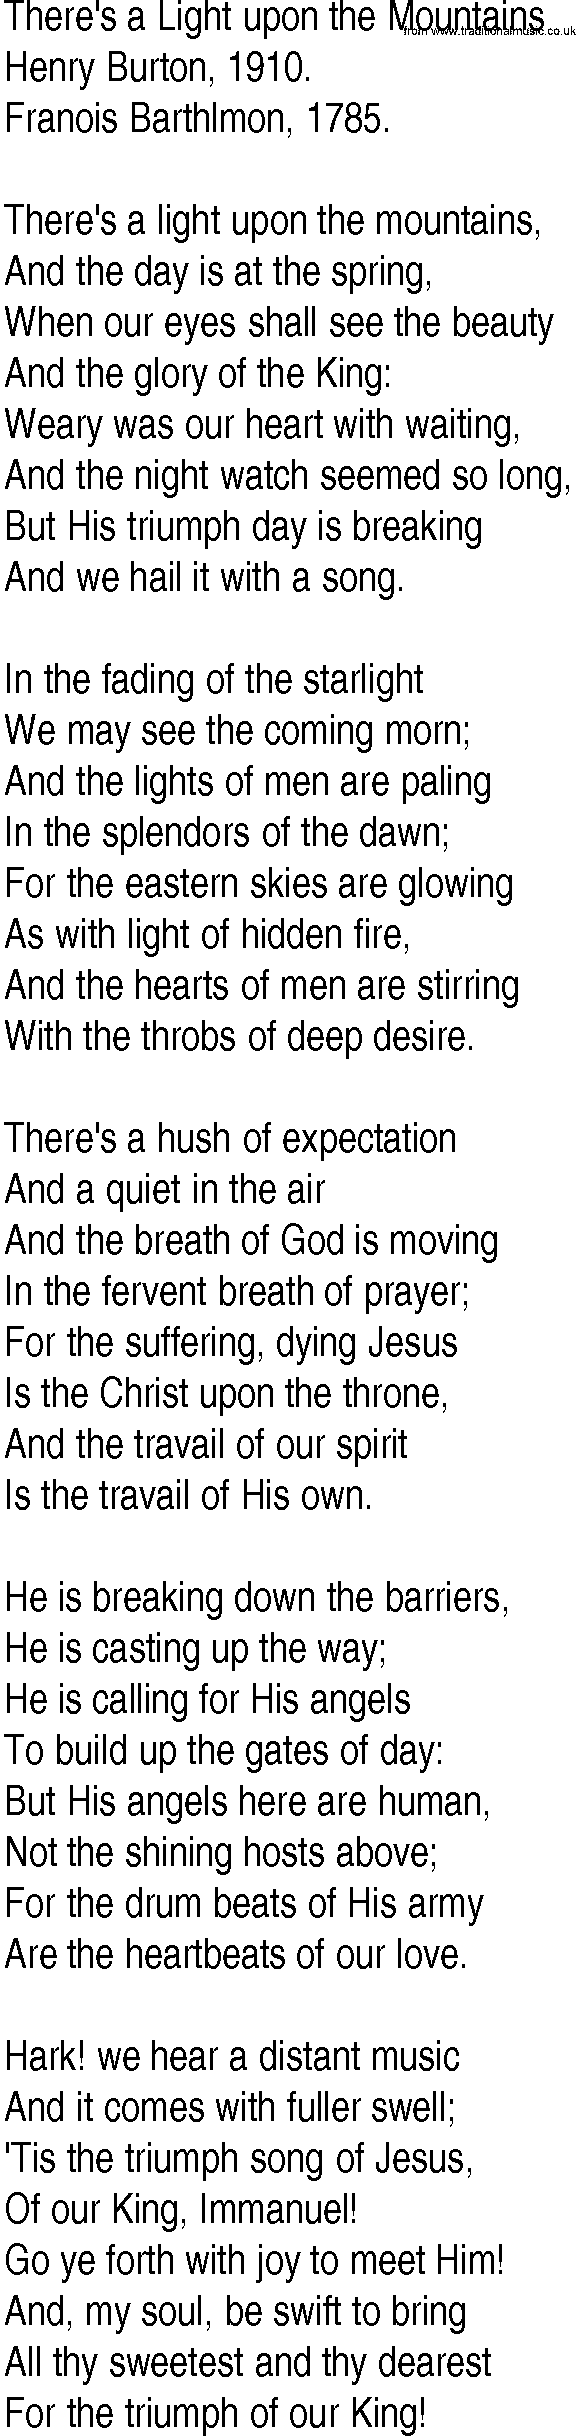 Hymn and Gospel Song: There's a Light upon the Mountains by Henry Burton lyrics